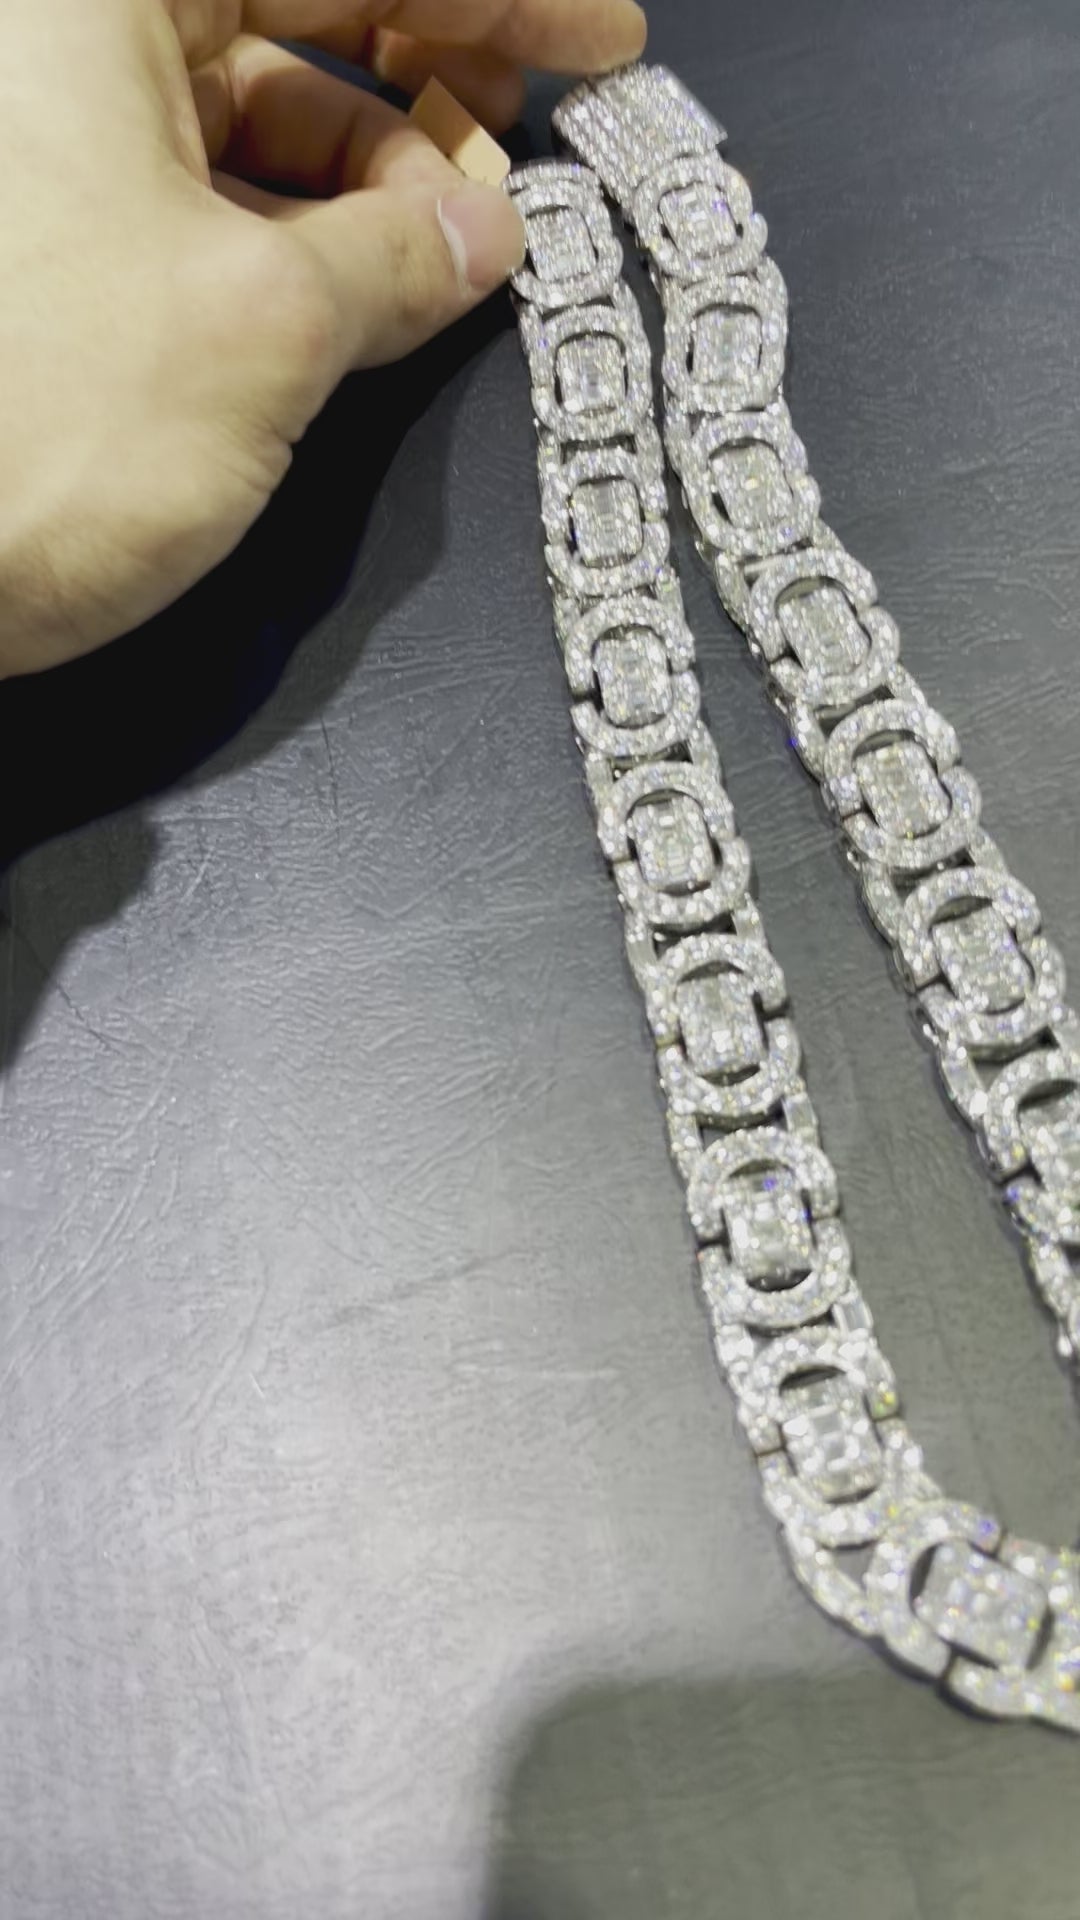 bust down byzantine chain "gucci mane chain" 14k white gold 366 grams and 90 cts vvs1 natural diamonds t.w. crazy custom one of one iced out chain